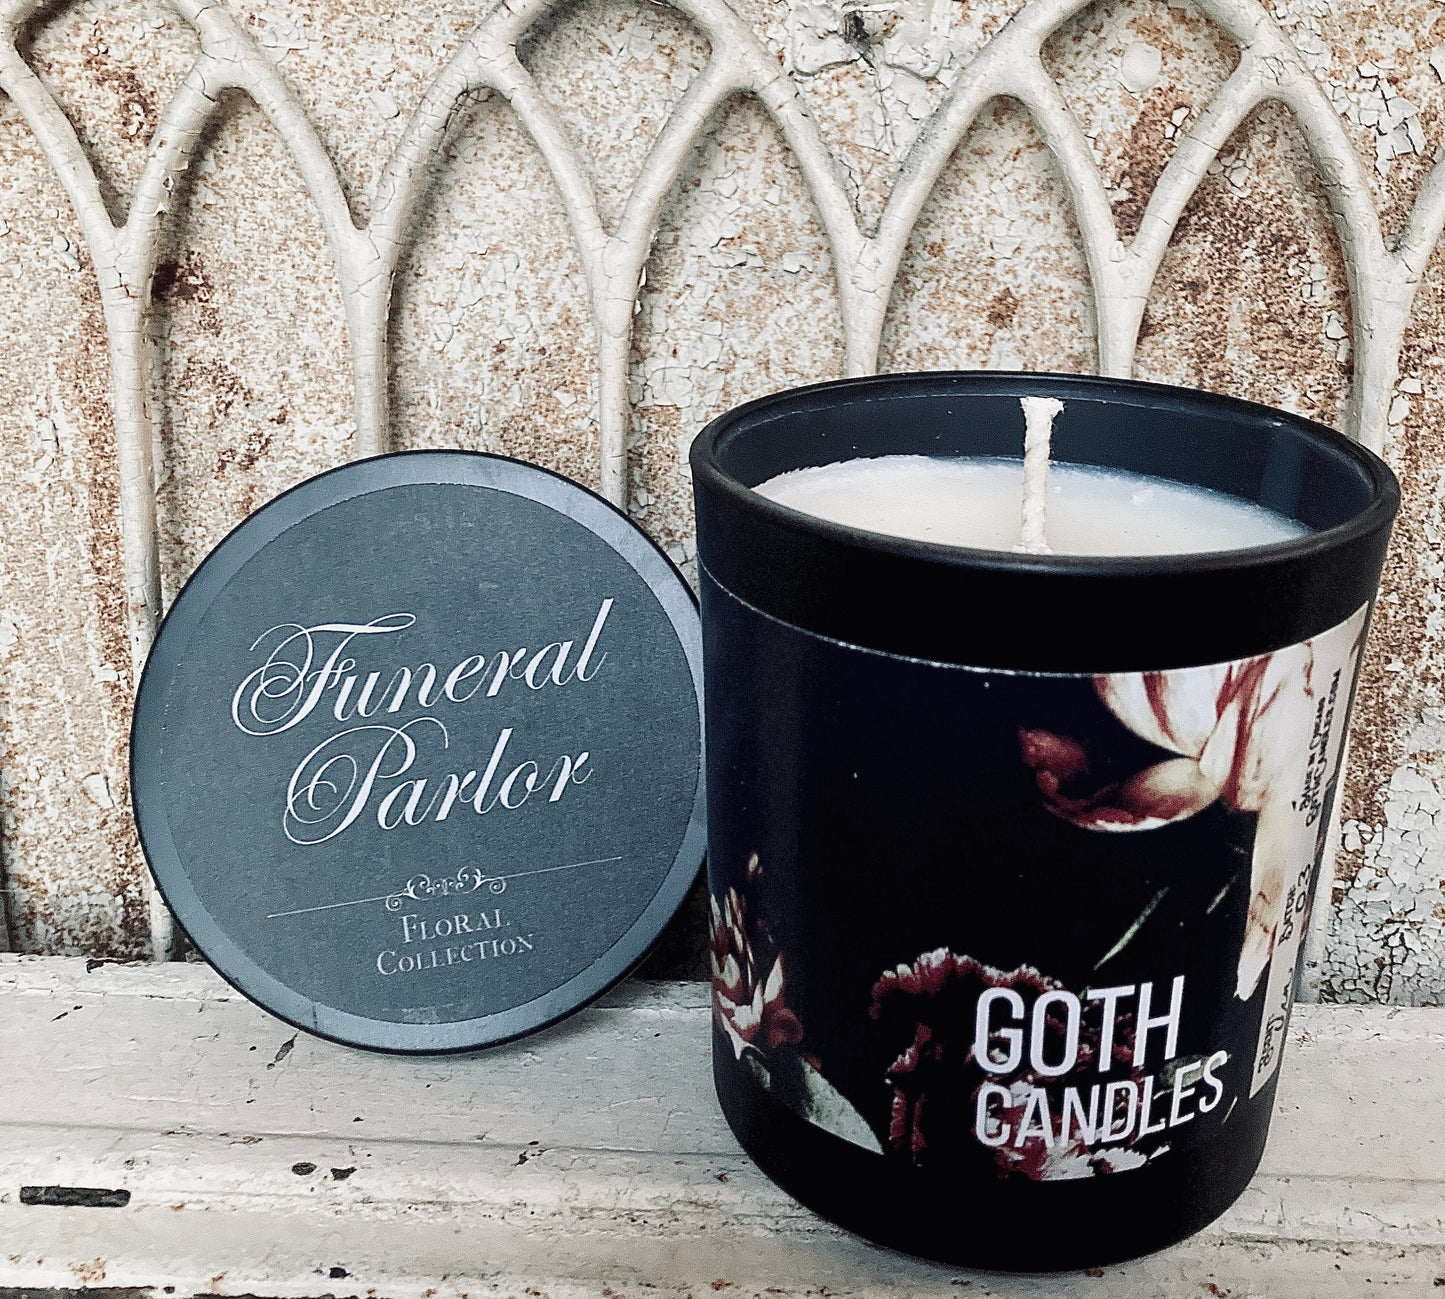 URN | Calla Lily | Funeral Parlor Collection | Goth Candles | Calla Lily Scent | Premium Soy Wax | Valentines Day Gift